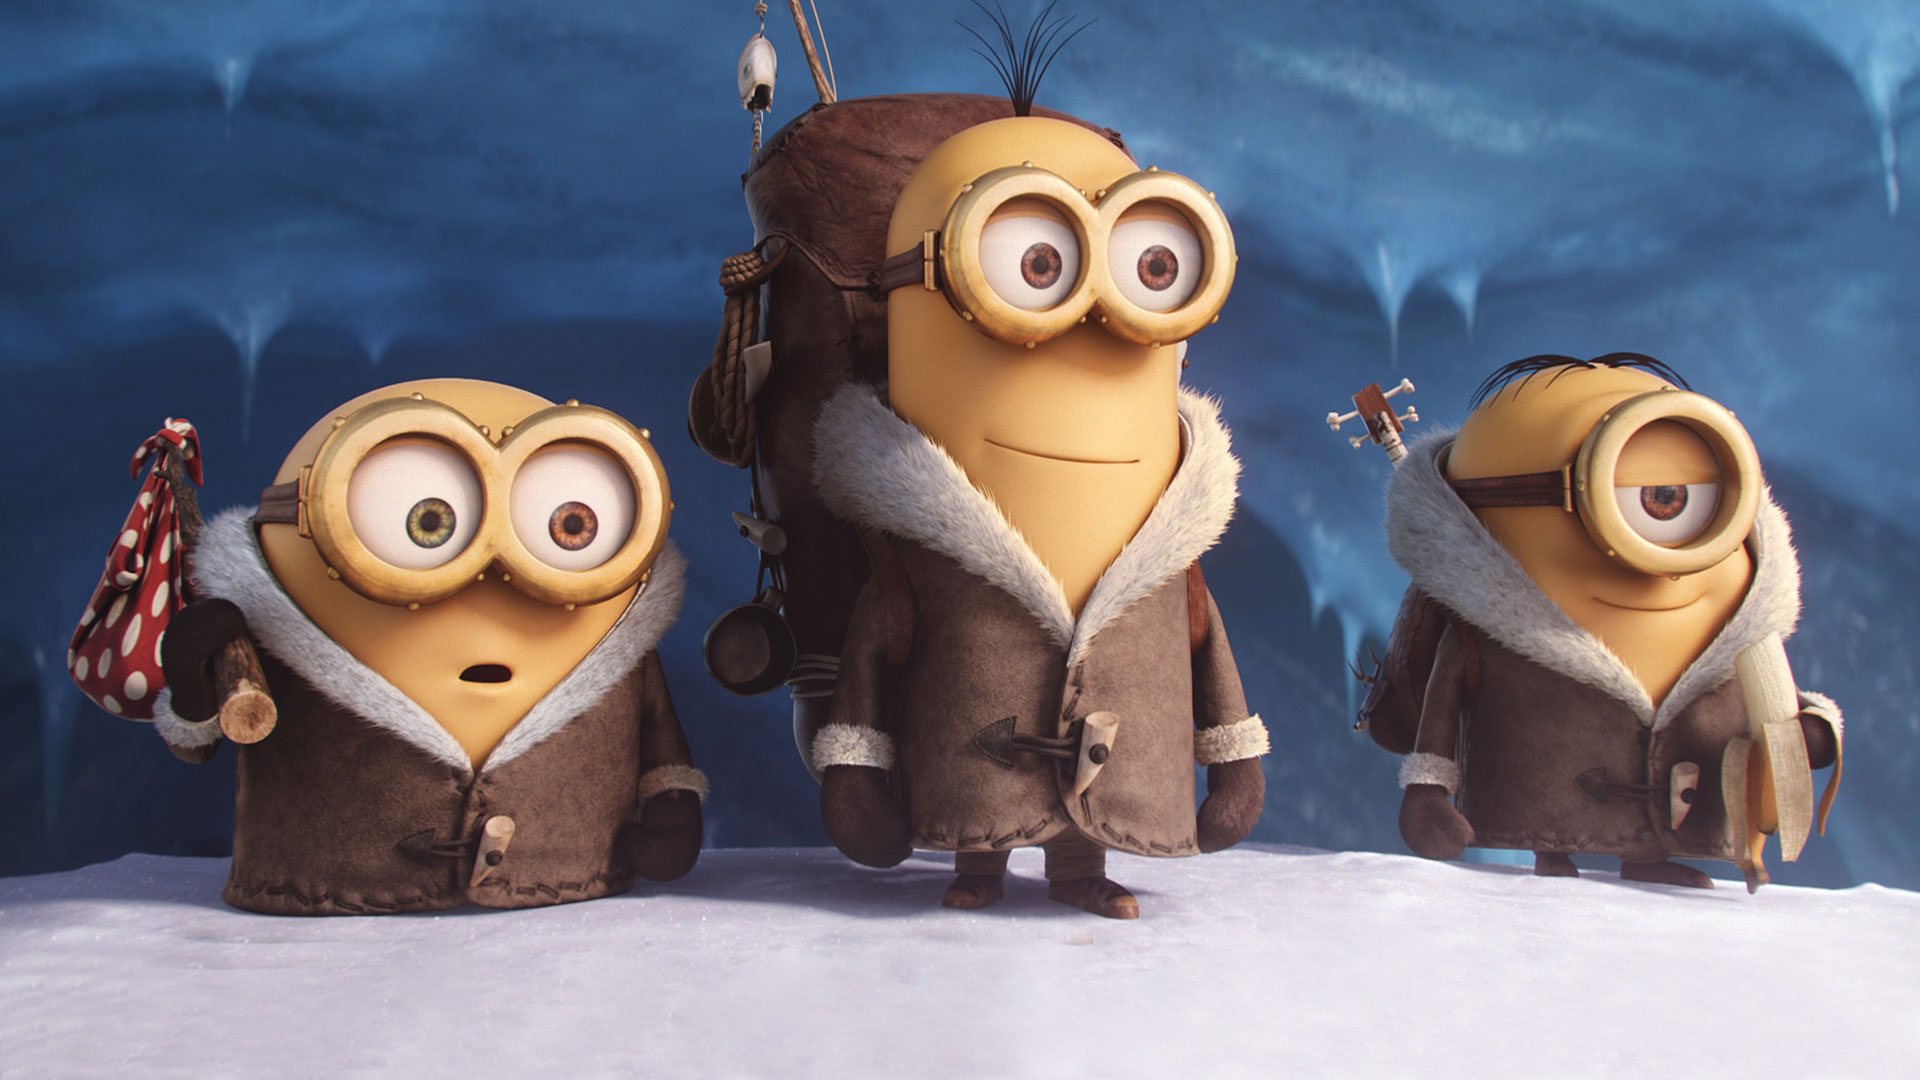 A Cute Collection Of Minions Movie 2015 Desktop Background & iPhone Wallpaper